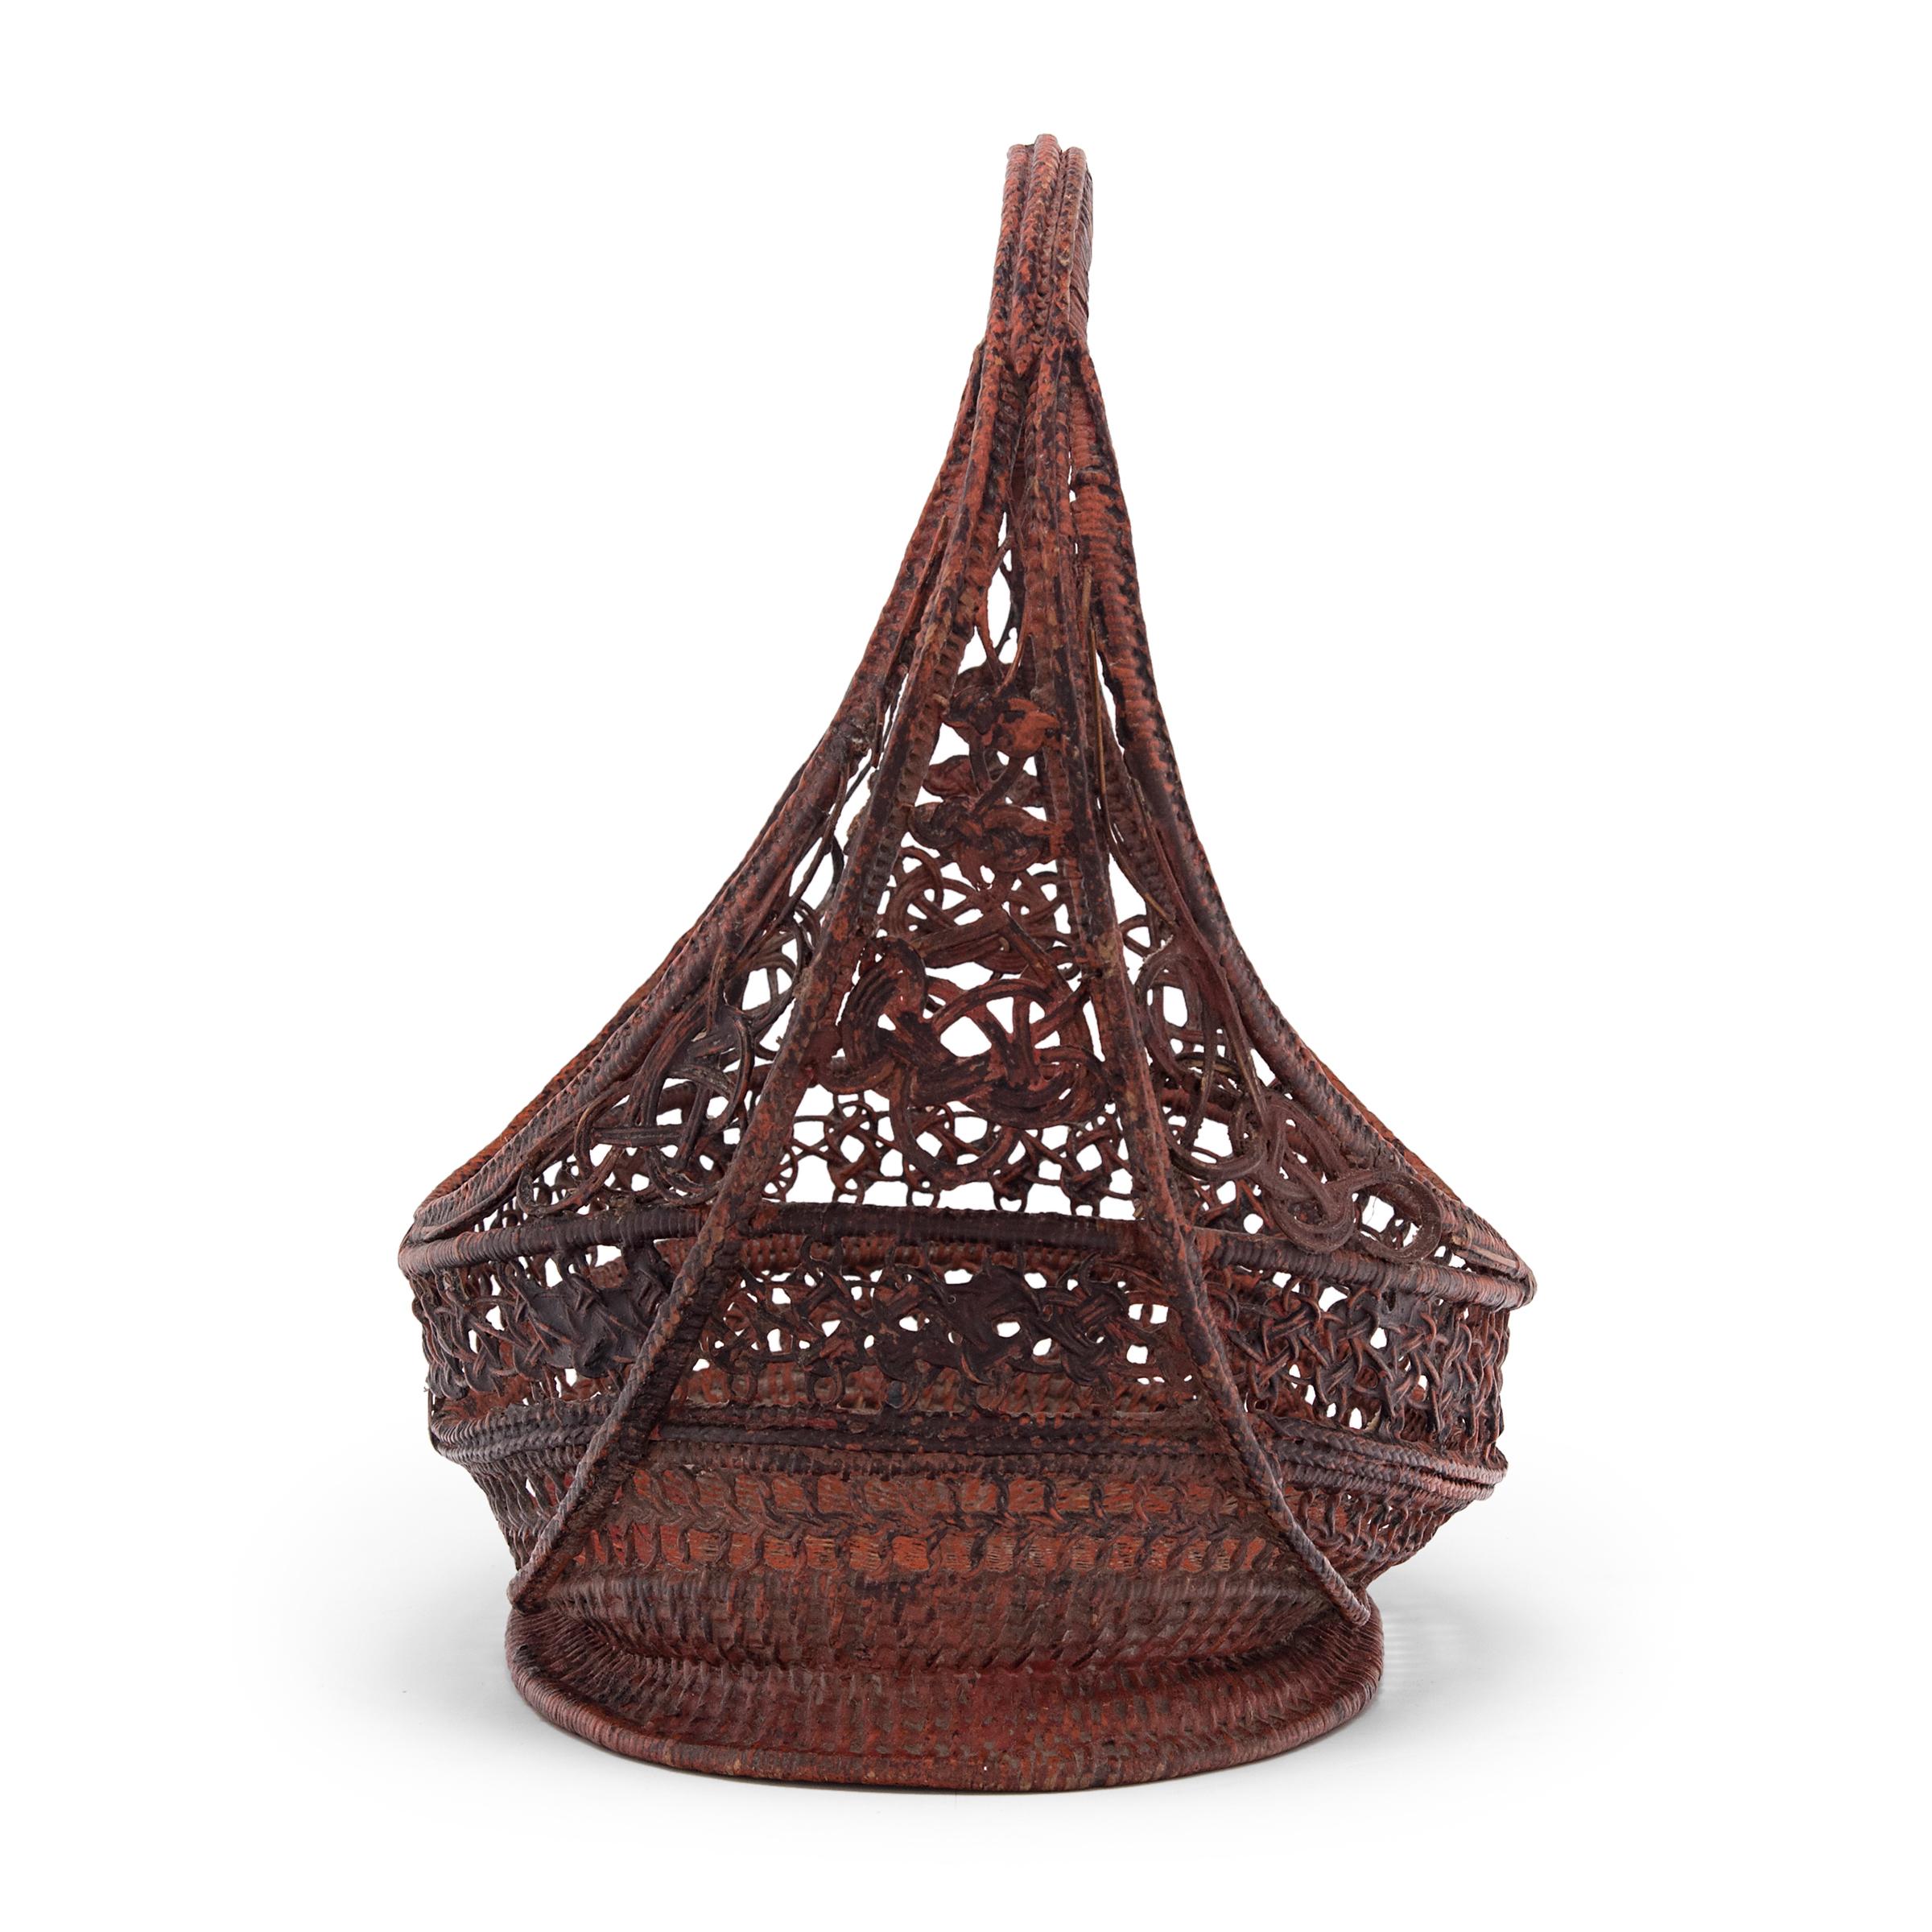 20th Century Burmese Red Lacquer Flower Basket, c. 1900